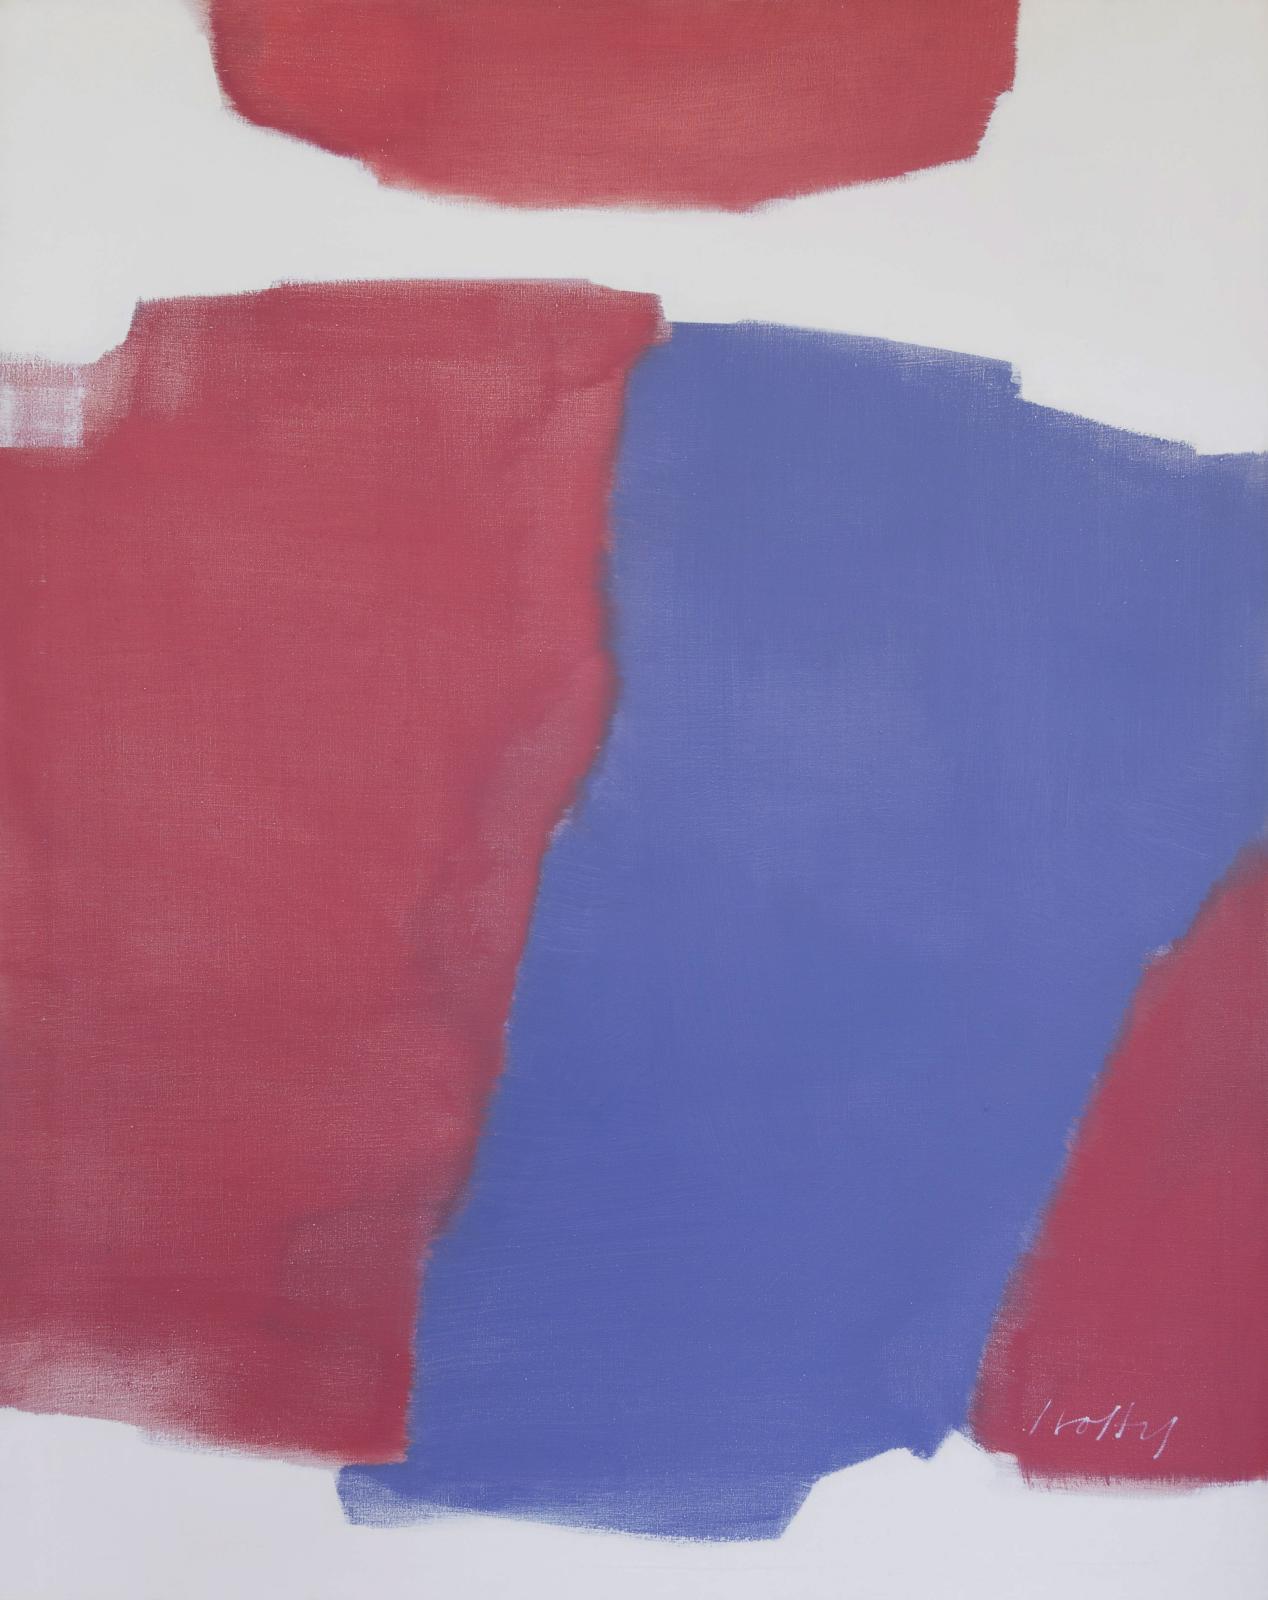 Carl Holty, Moving Red, 1963